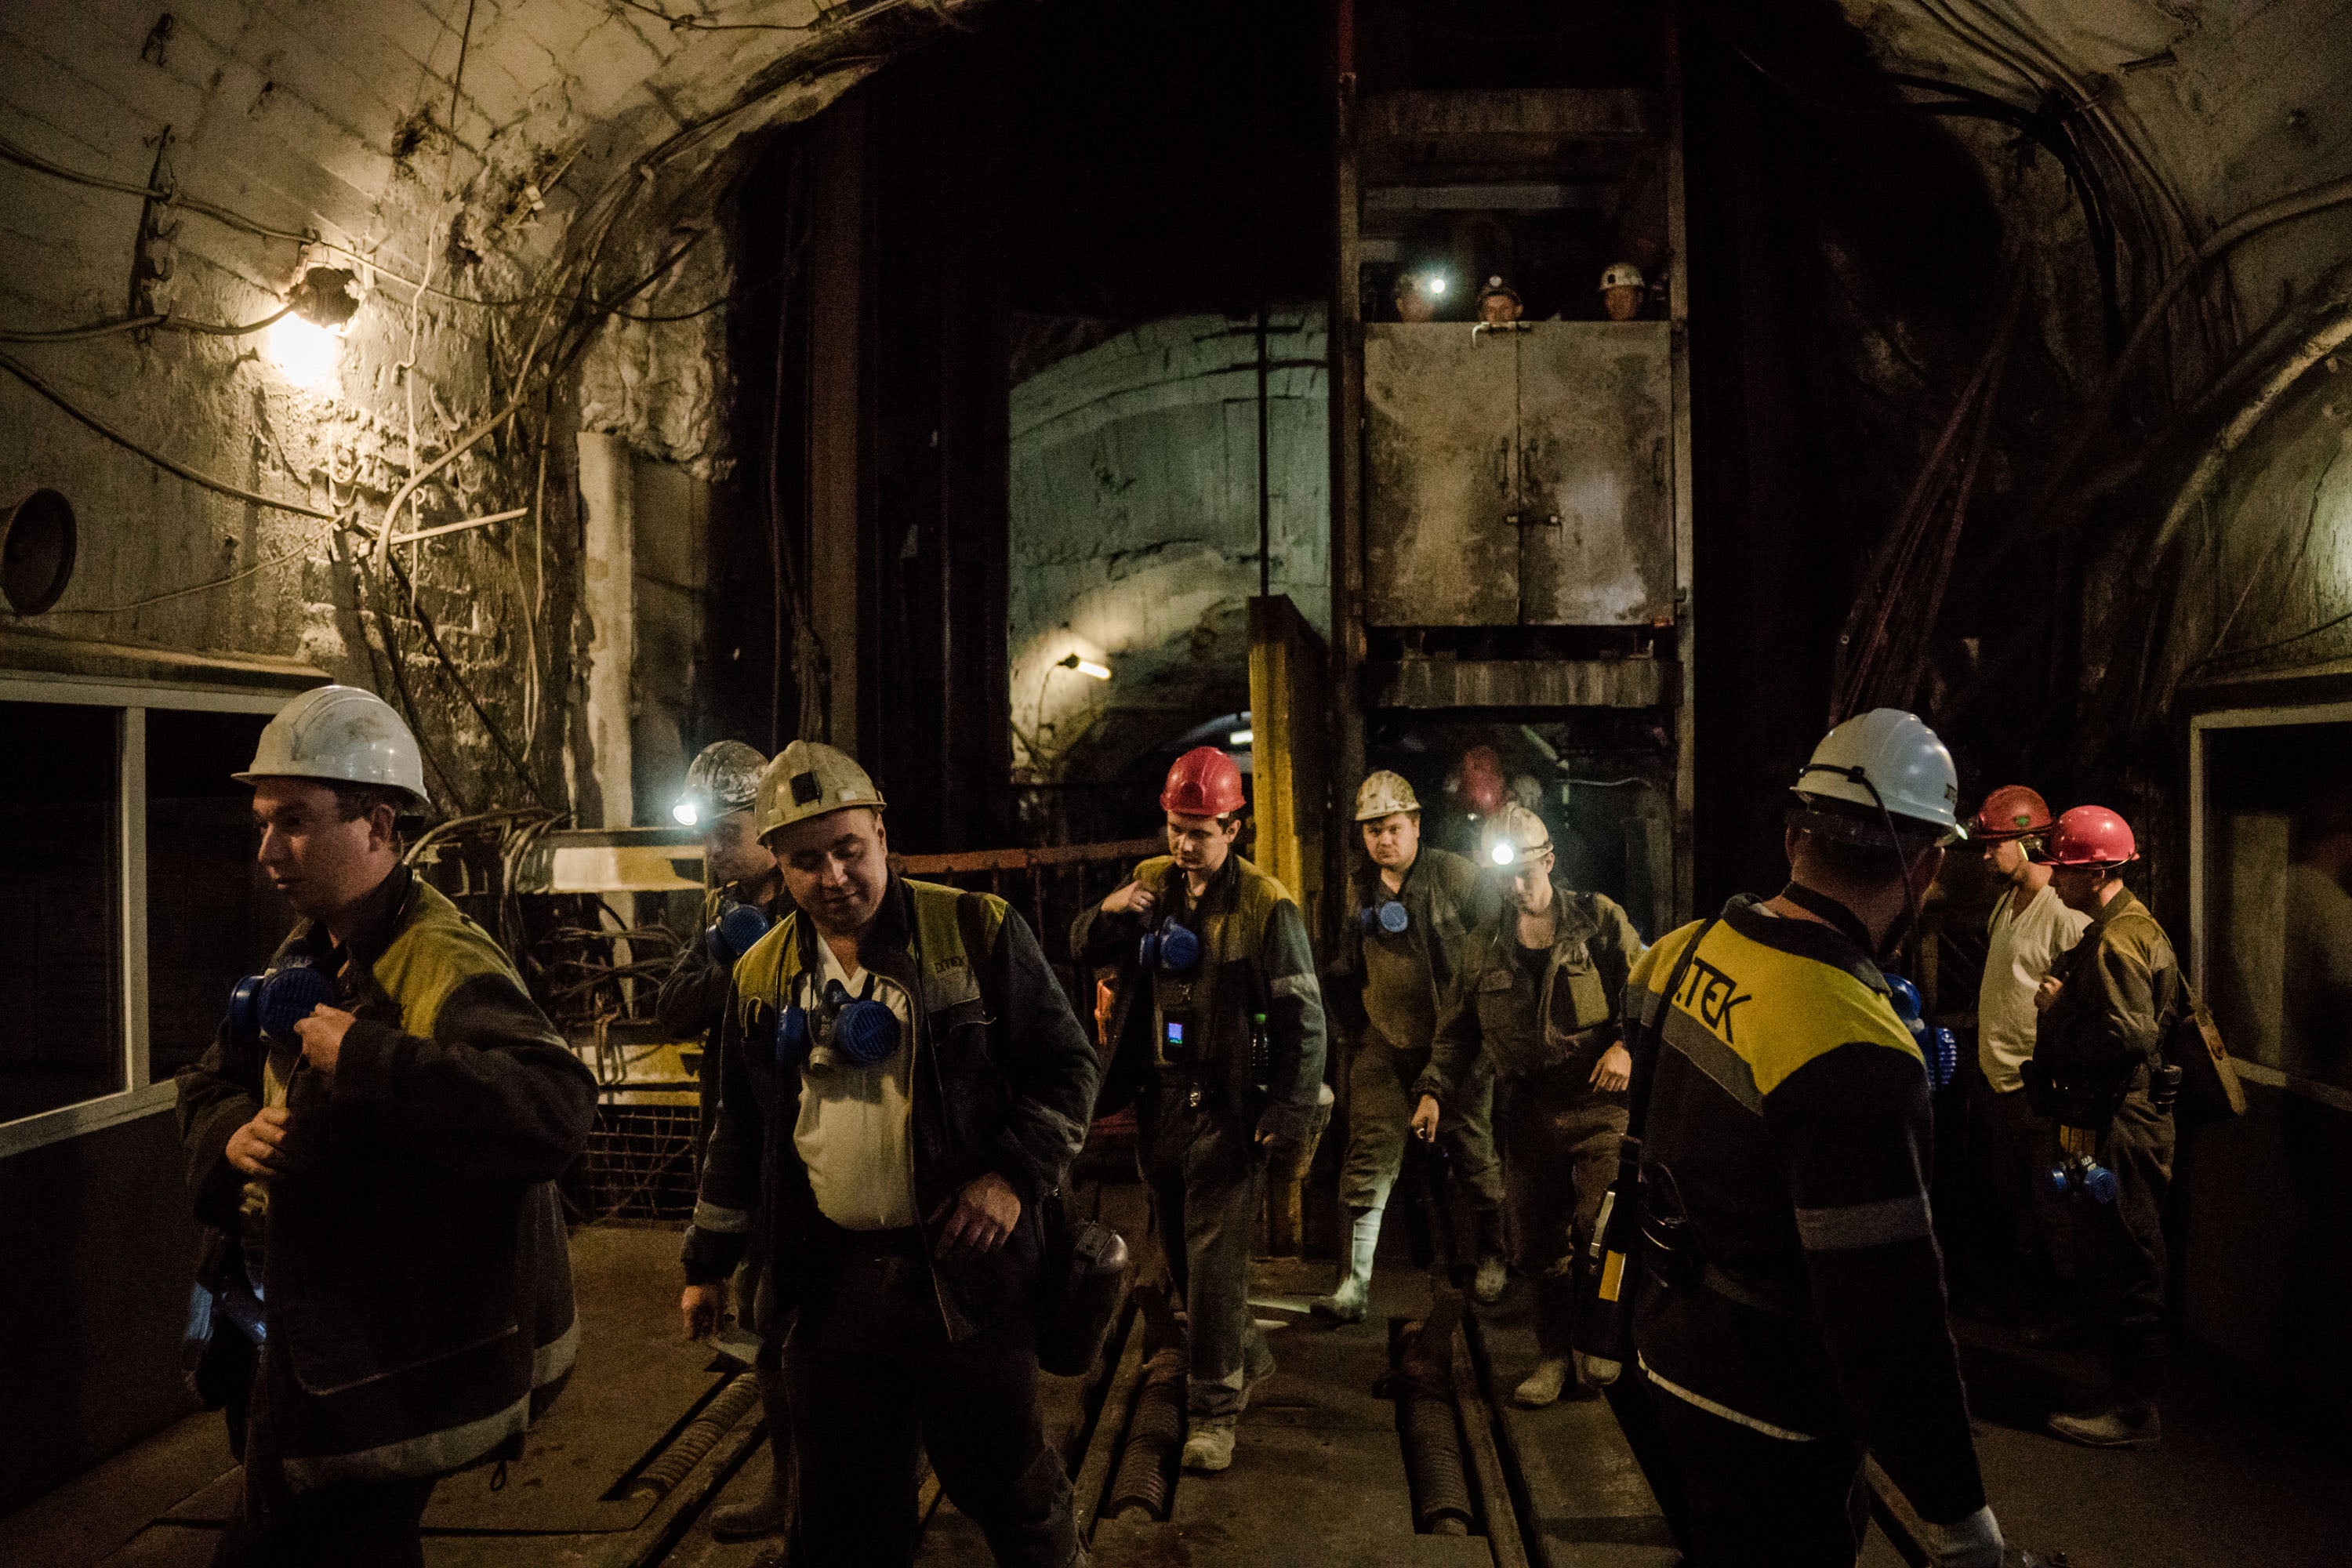 The men and women still mining coal in eastern Ukraine consider their efforts a patriotic duty following Russia's invasion